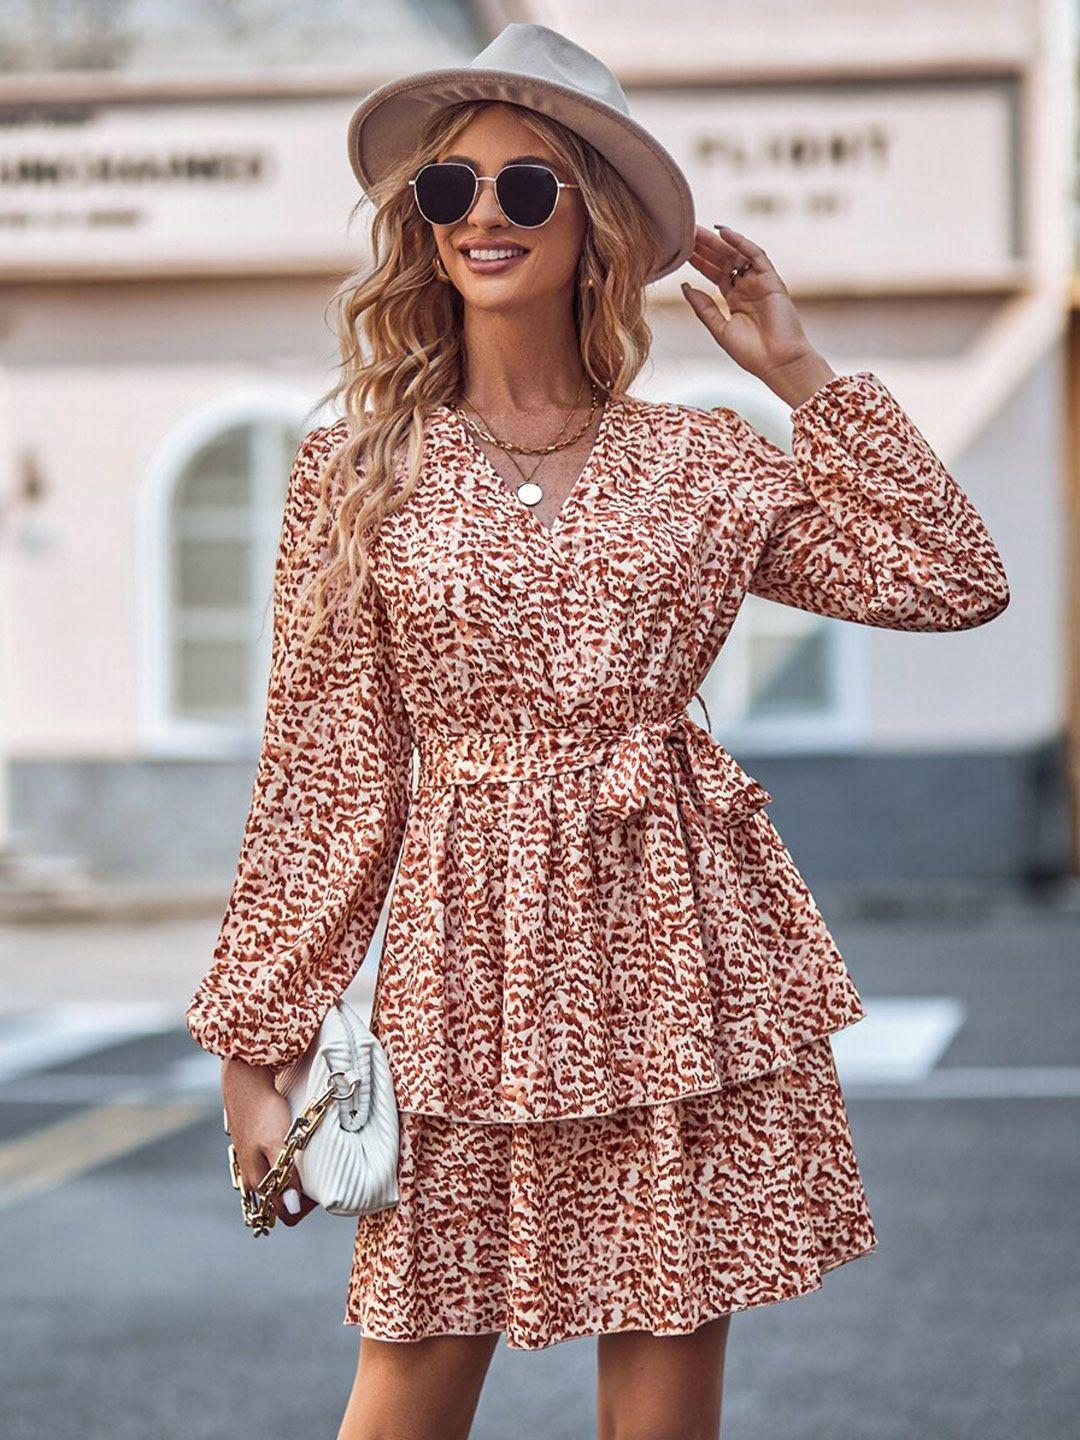 stylecast brown animal printed layered fit & flare dress